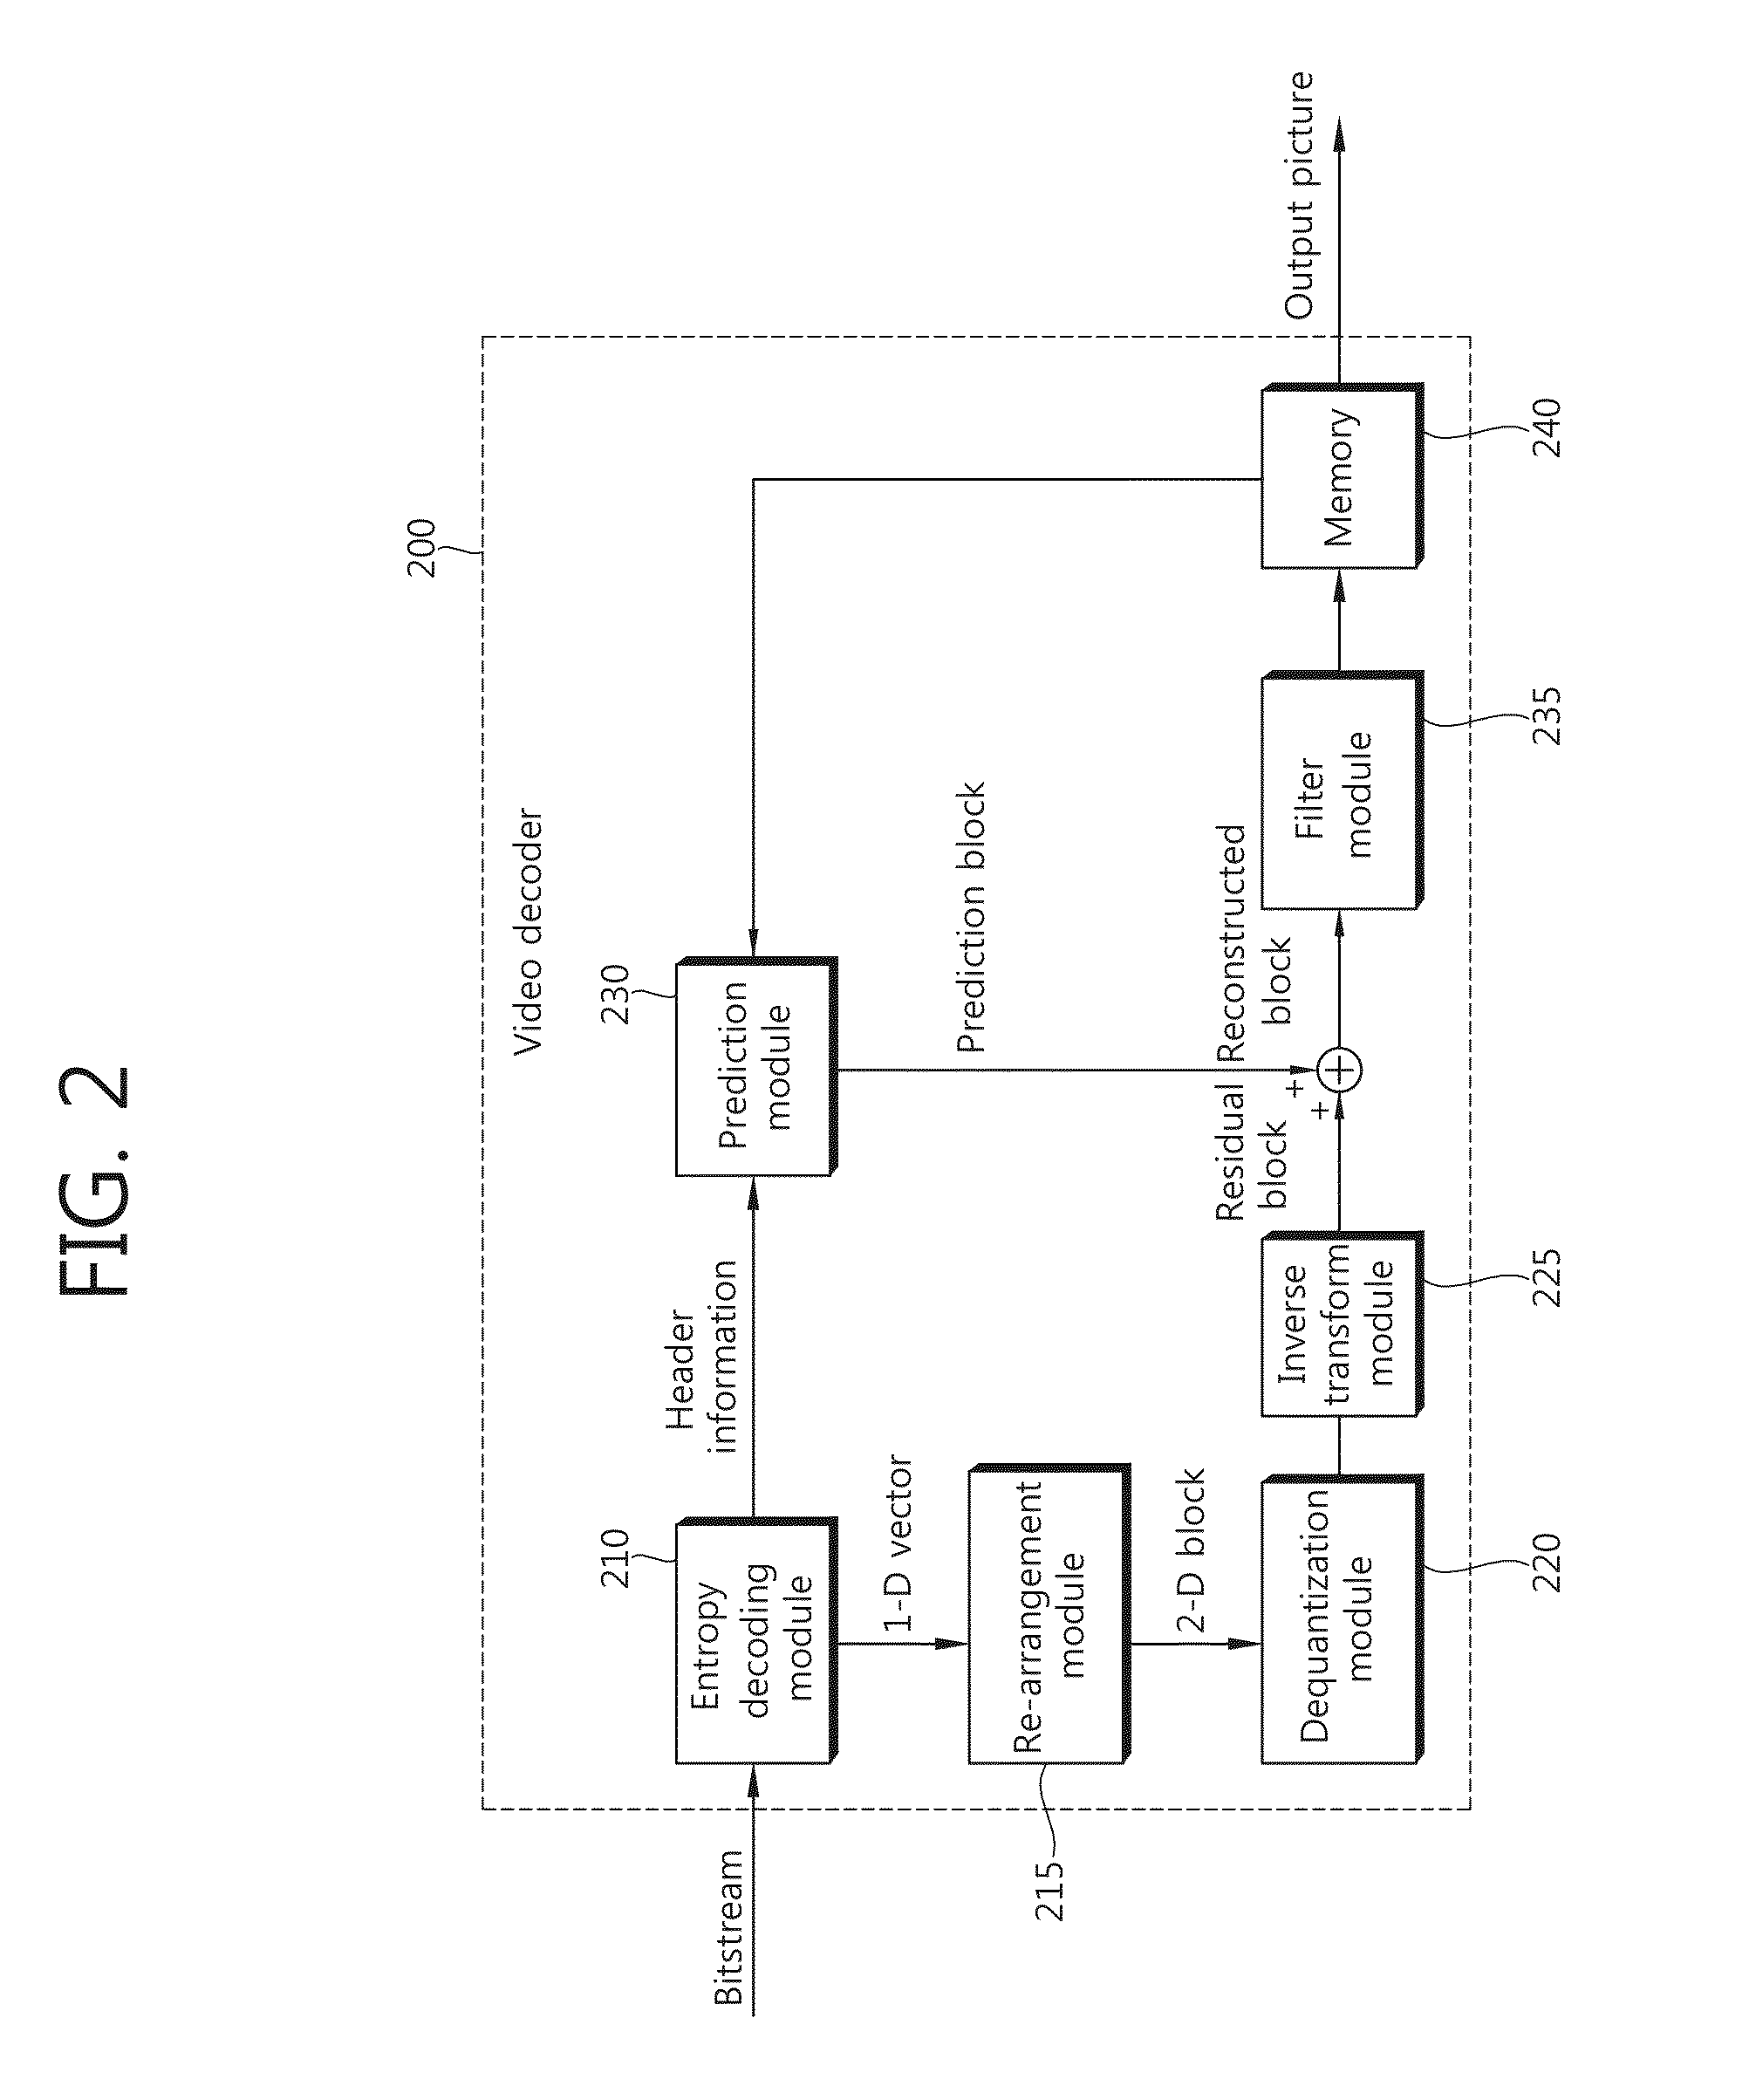 Method for encoding and decoding image information